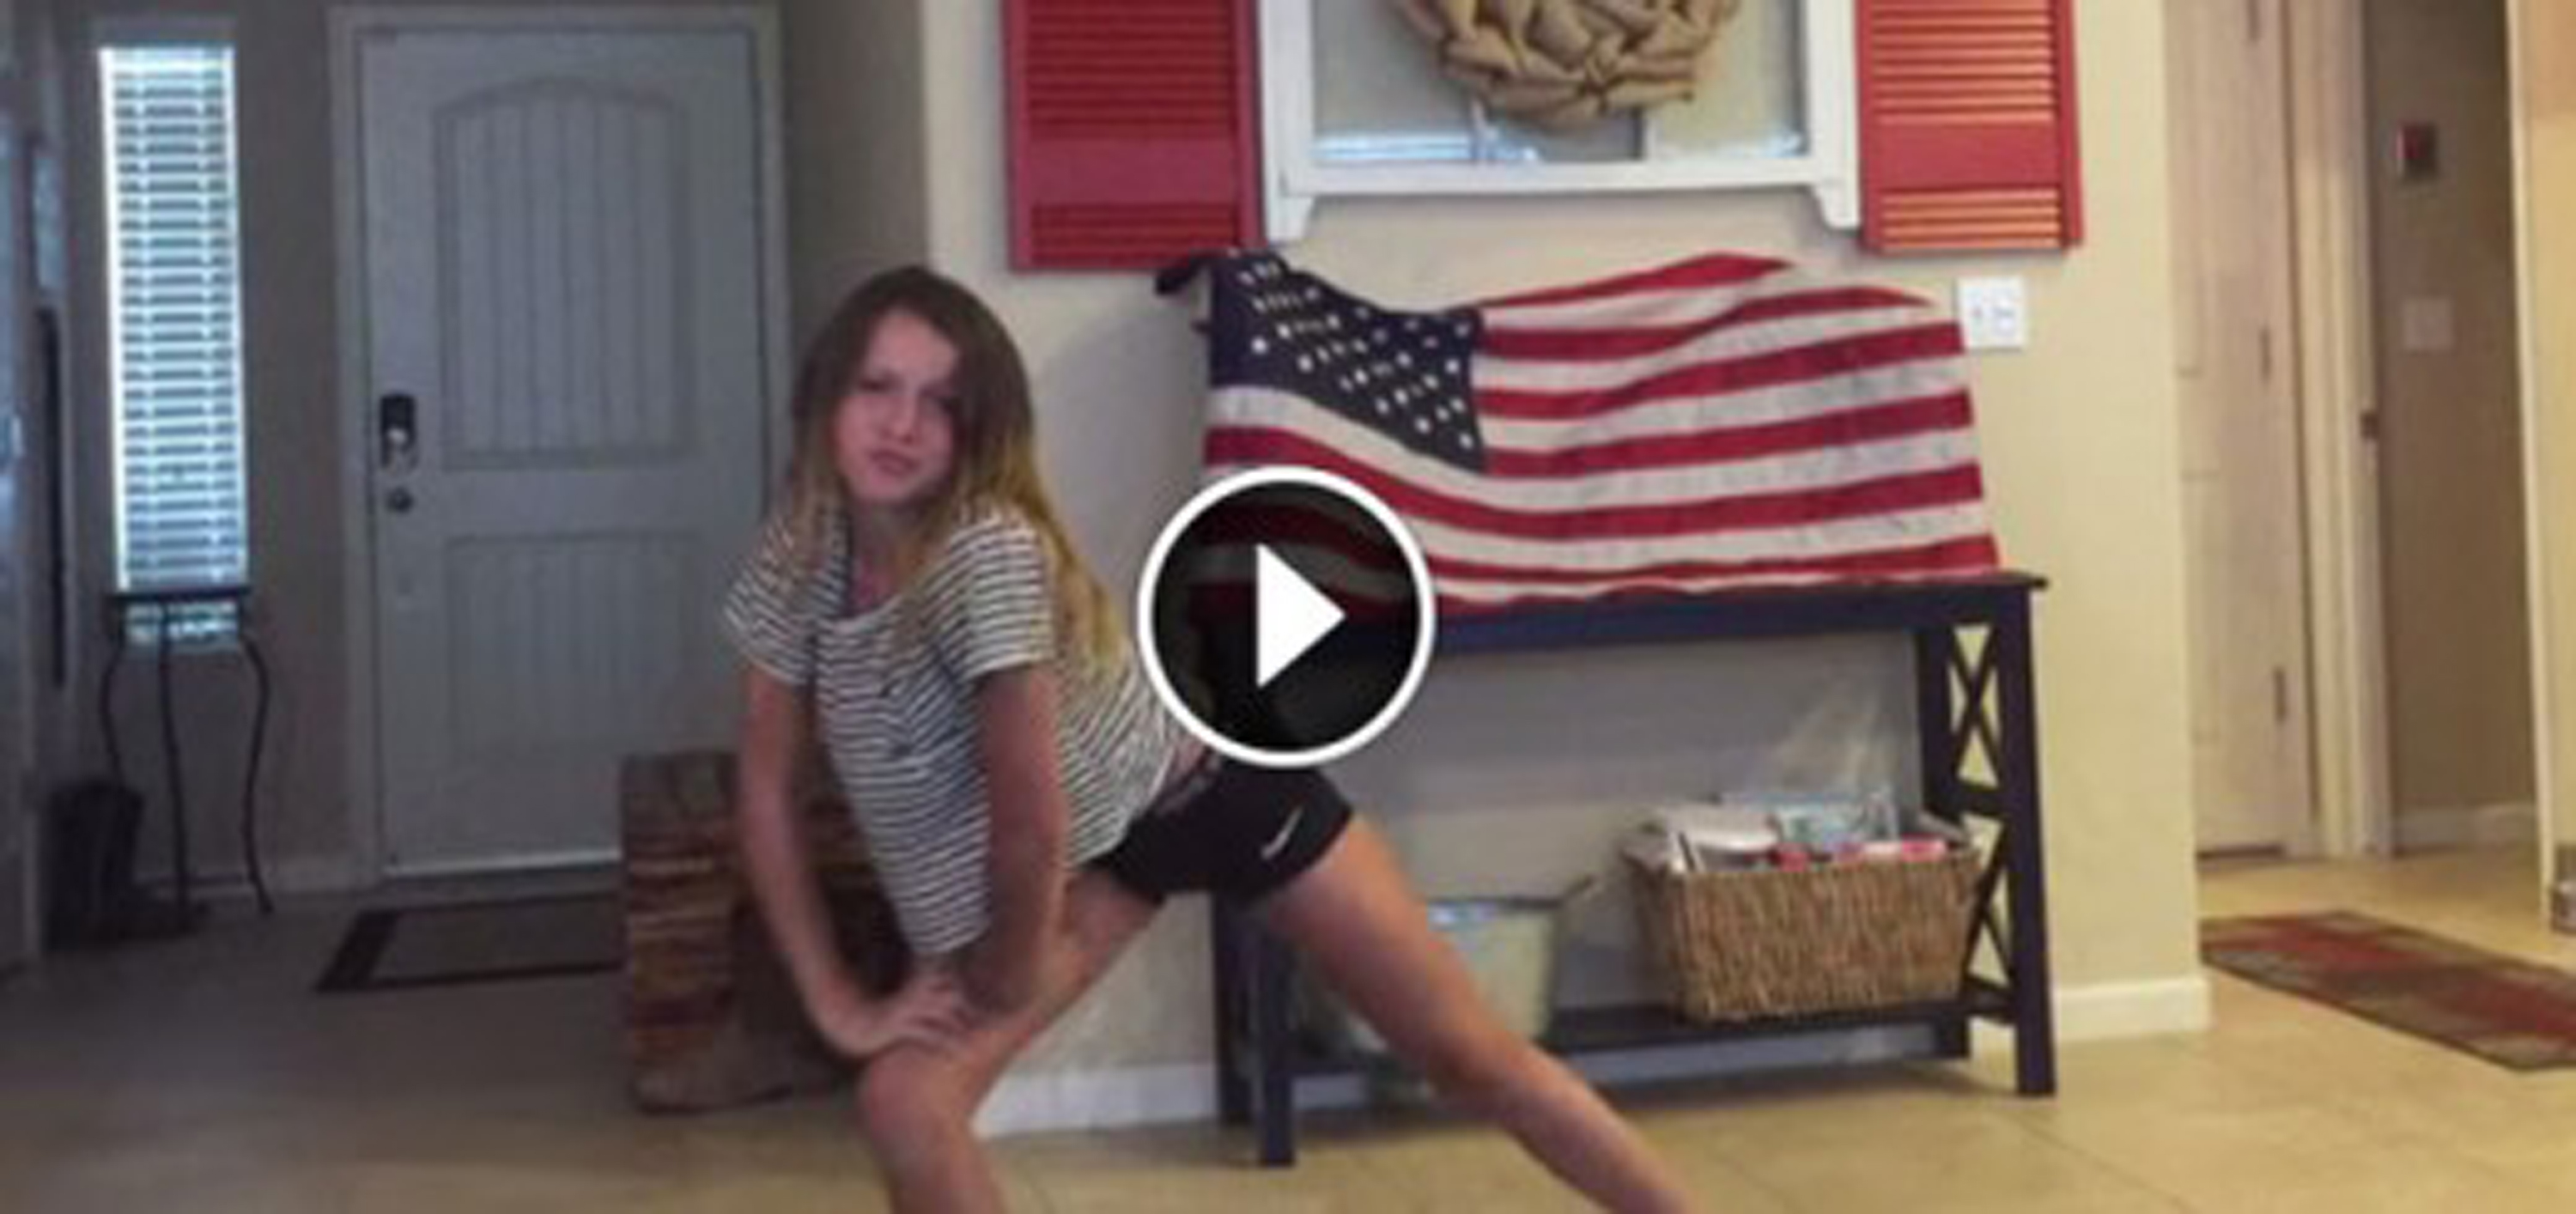 Cowboy Dad Catches his Daughter Dancing to Hip Hop. Now Watch his Reaction!